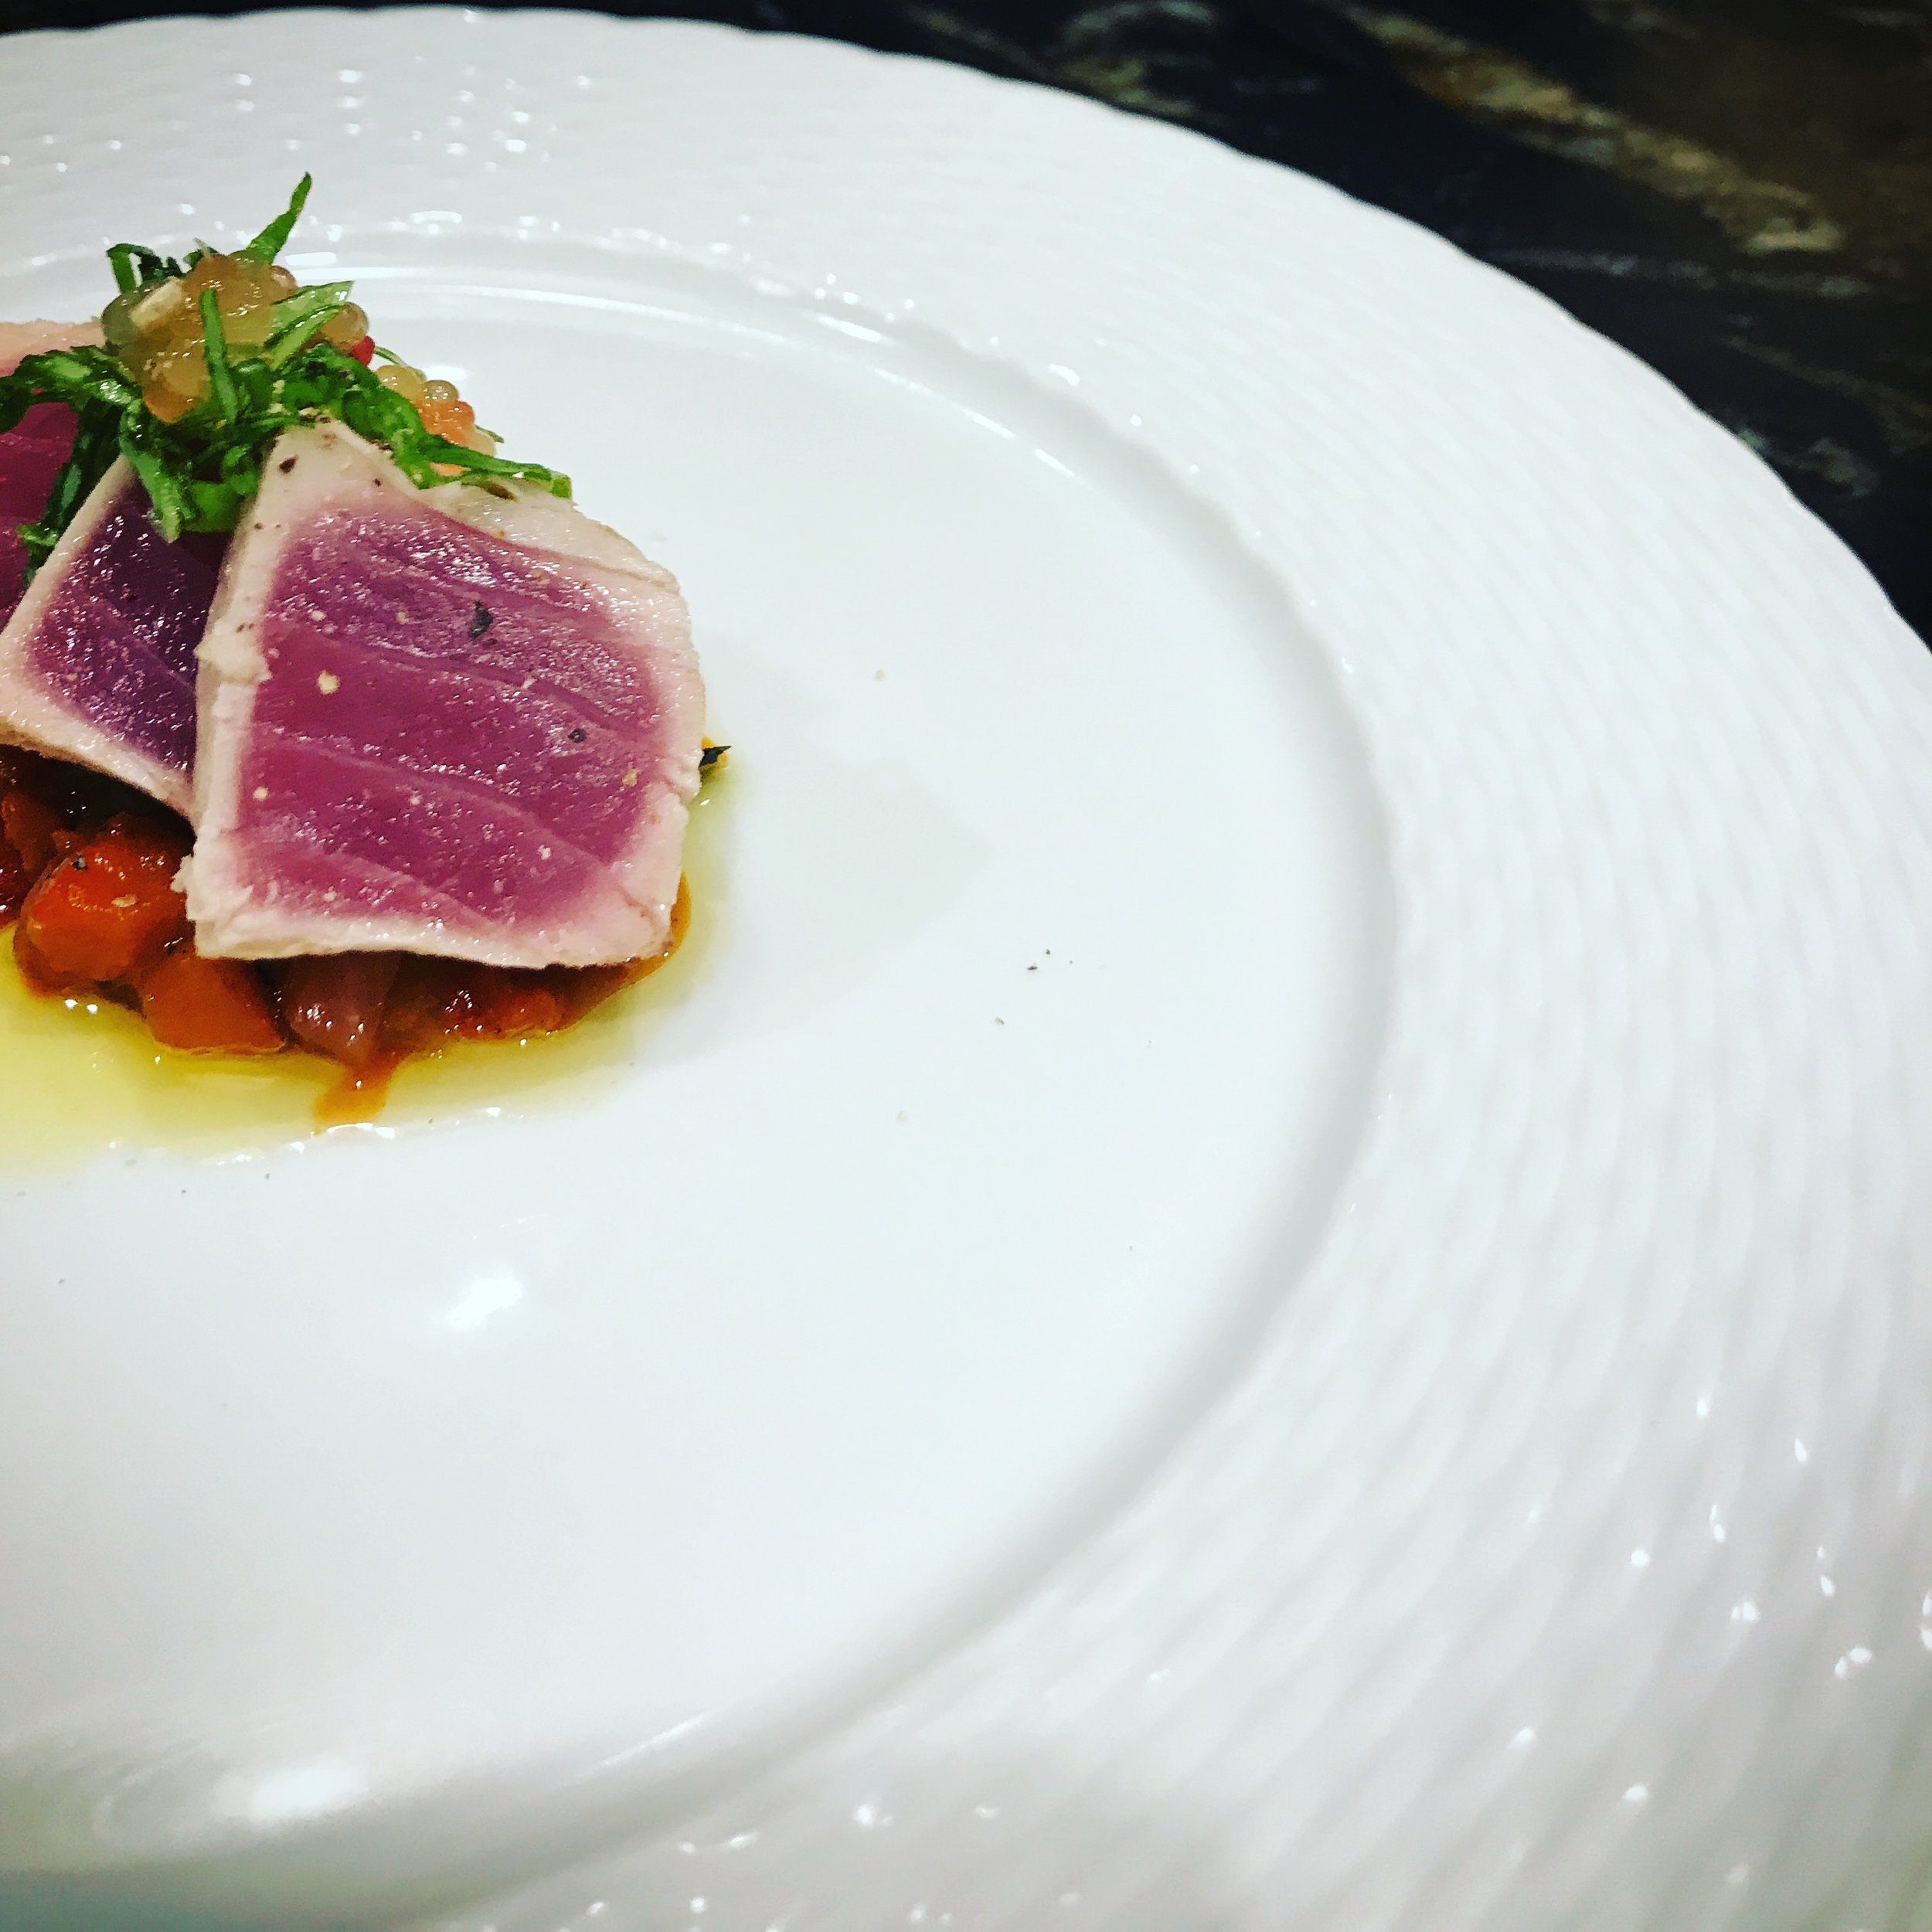  Tonight’s first course&nbsp;Seared tuna, confit fennel, charred bullhorn peppers and finger lime. The finger limes add a super textural fresh lime tartness to this dish&nbsp; #foodphotography  #nativefoods &nbsp; #bushfoods  #prettybeachhouse &nbsp;